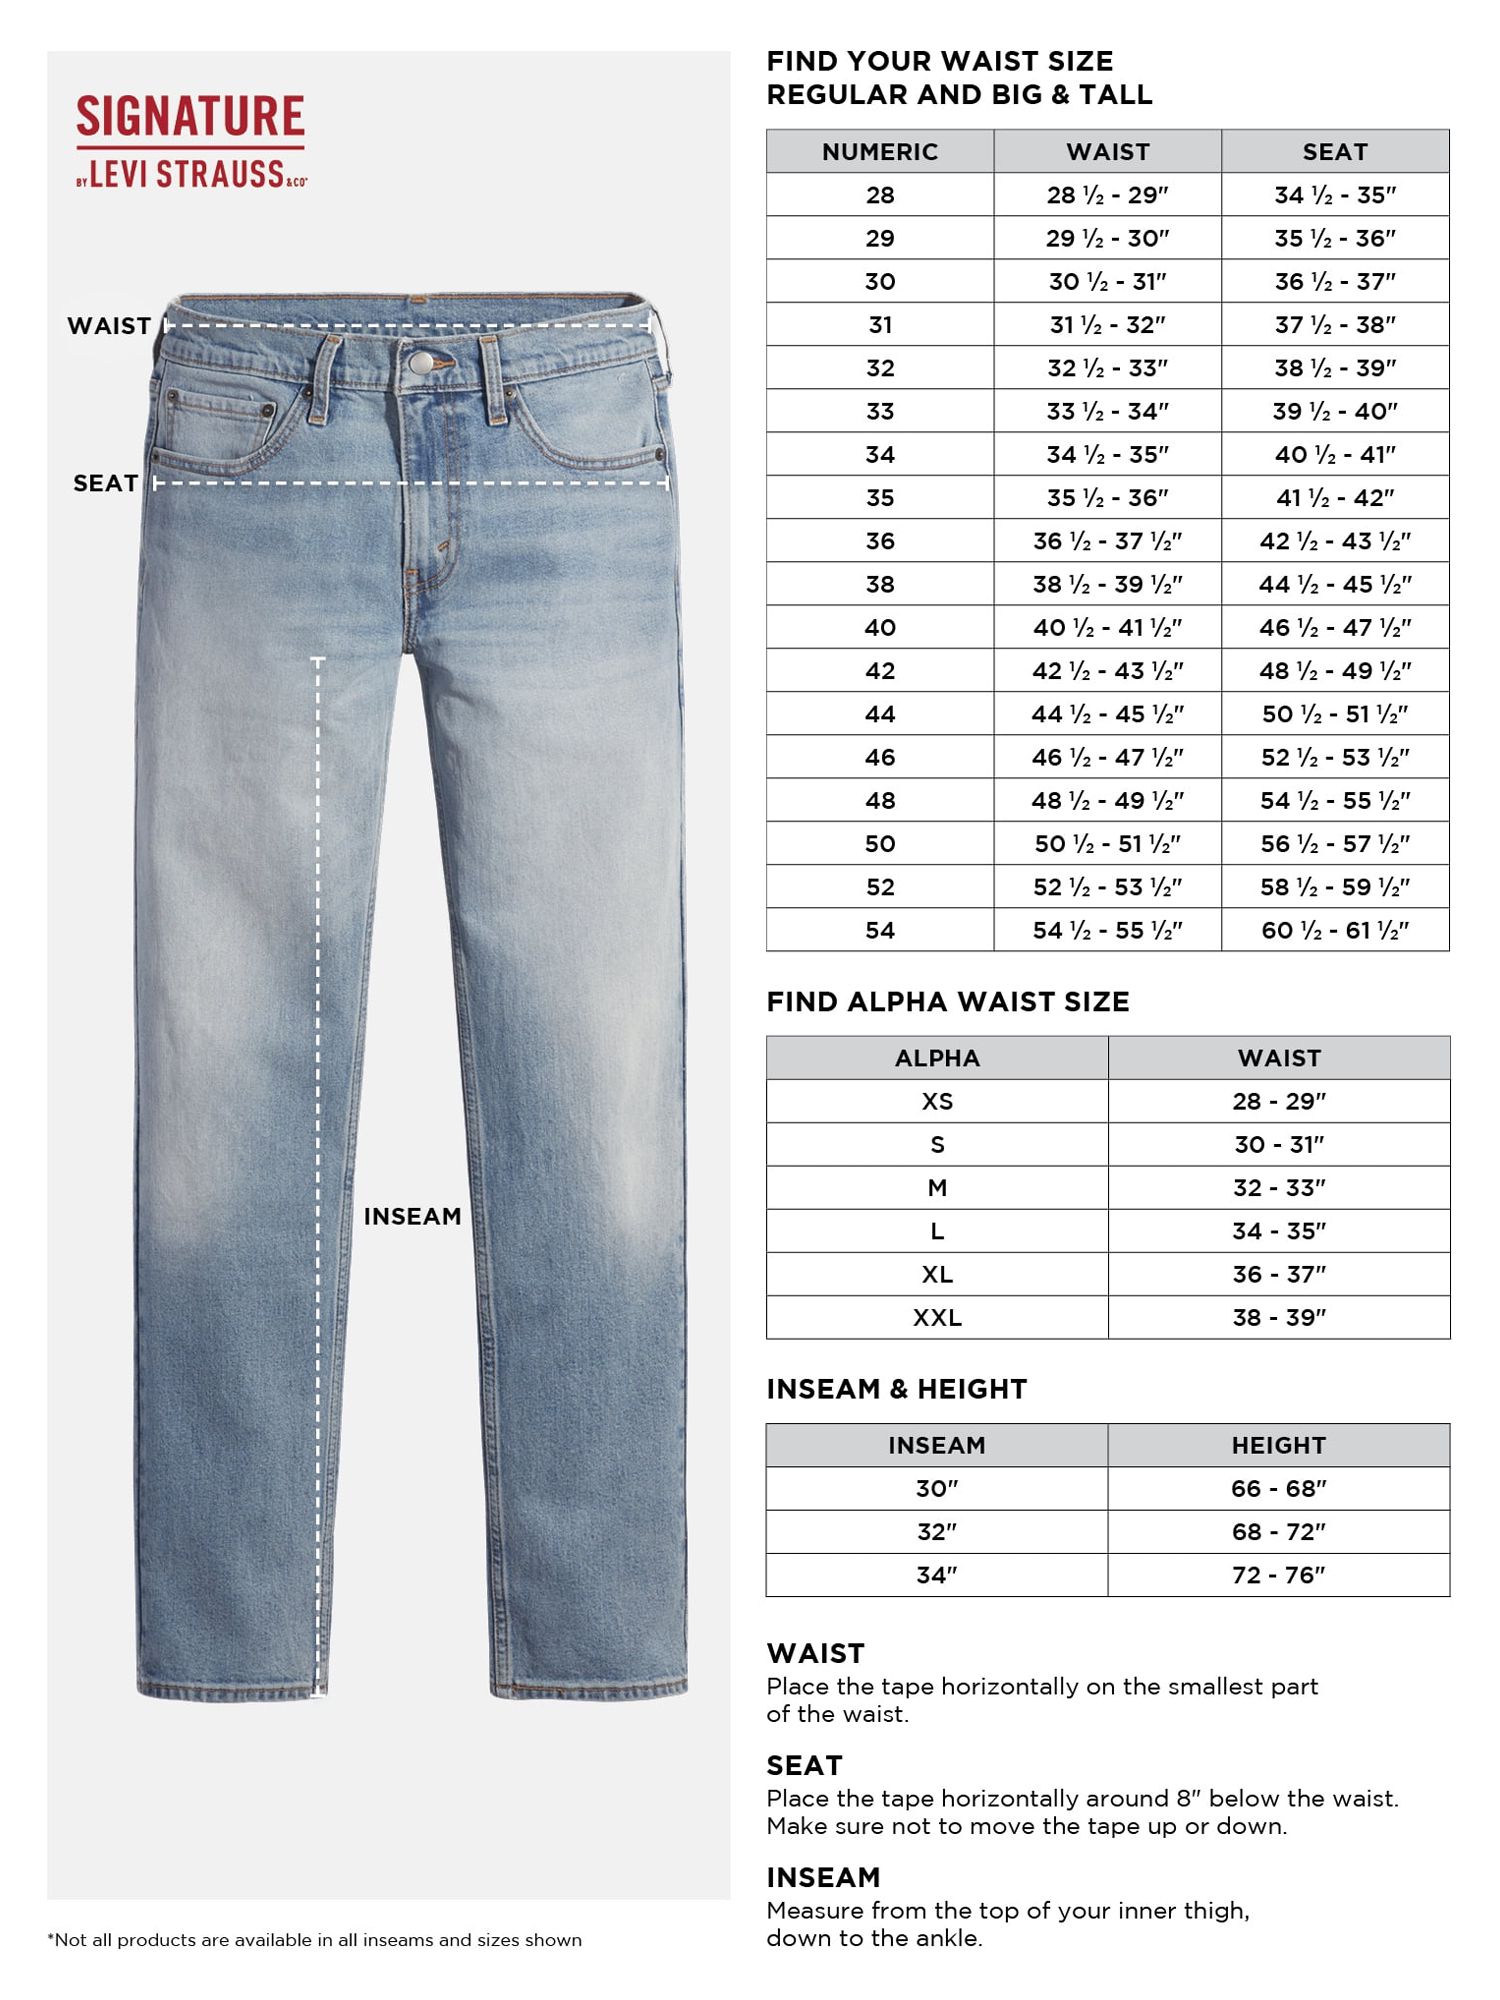 Signature by Levi Strauss & Co. Men's and Big Men's Slim Fit Jeans - image 2 of 5